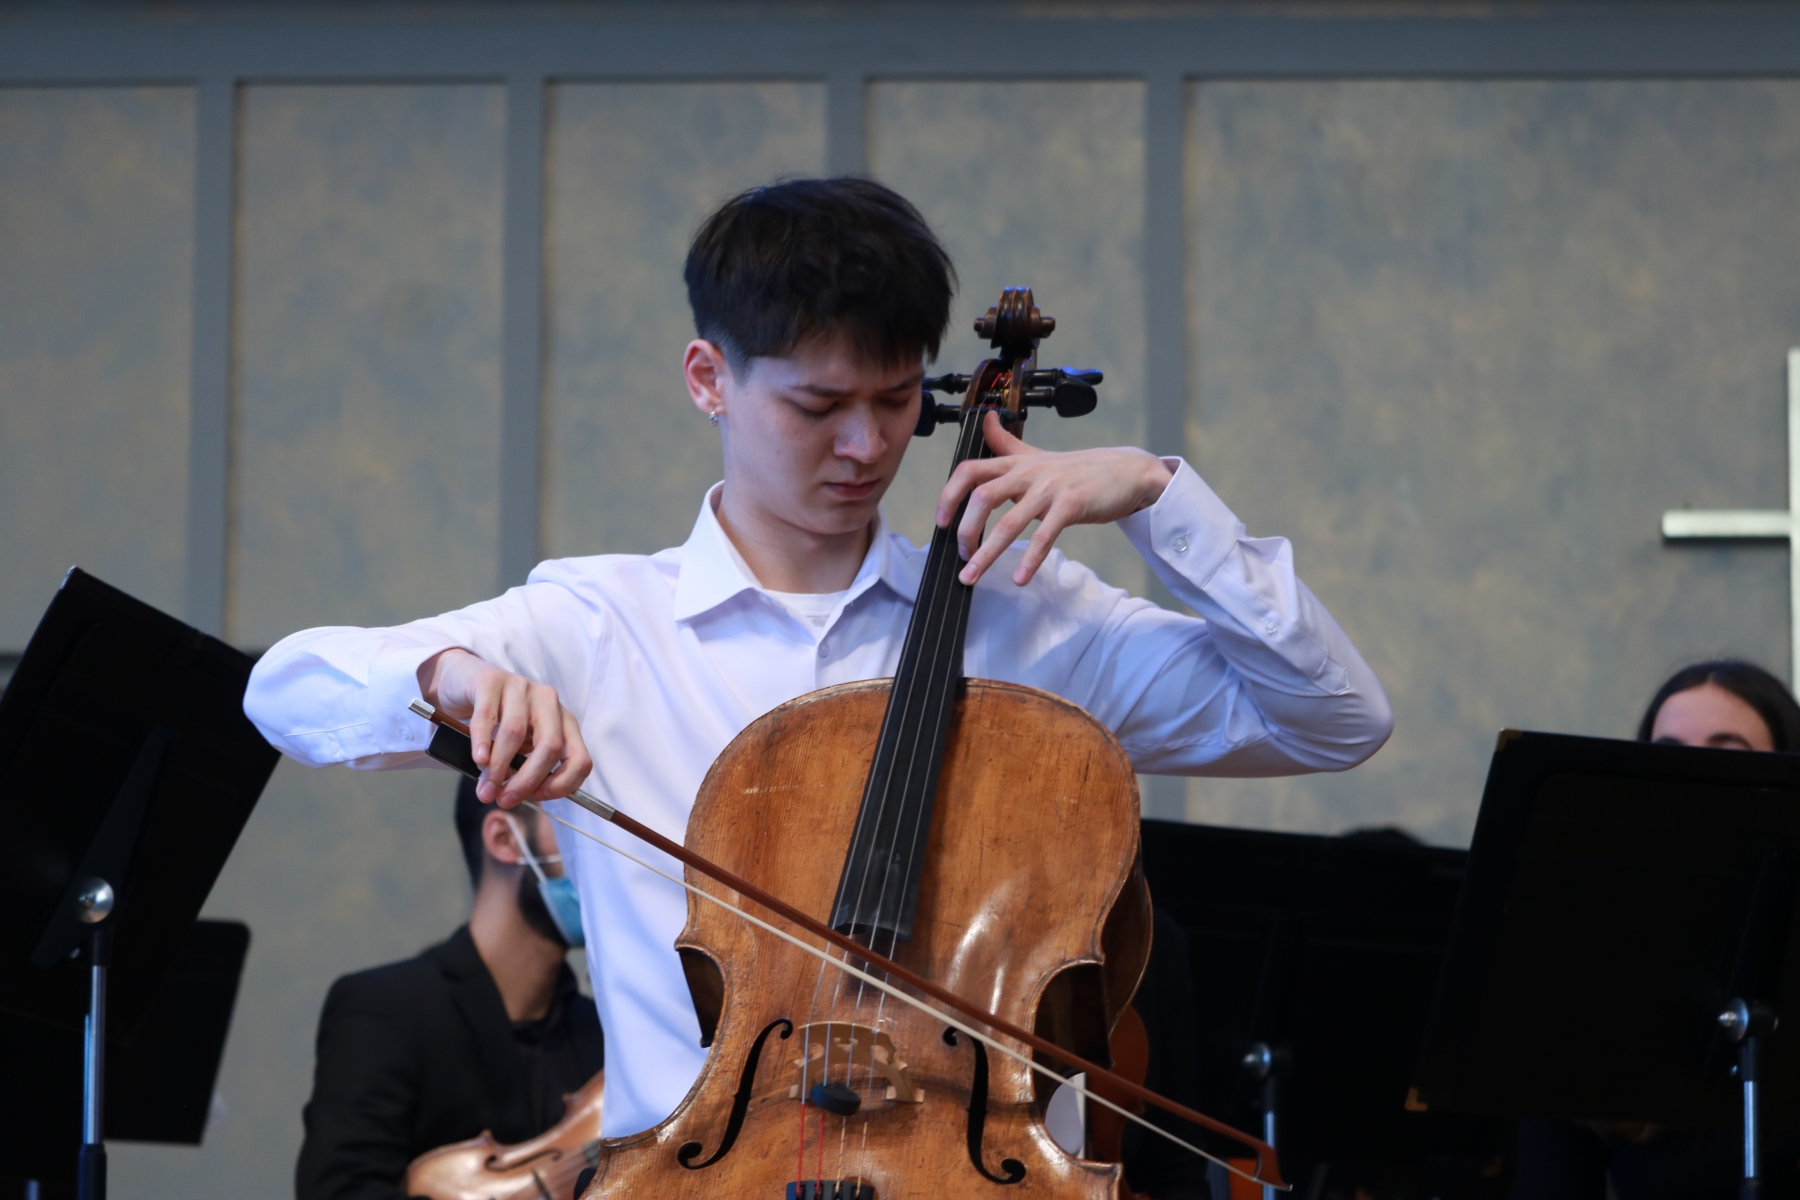 Matthew Stobbe performs cello with the University of Manitoba Symphony Orchestra